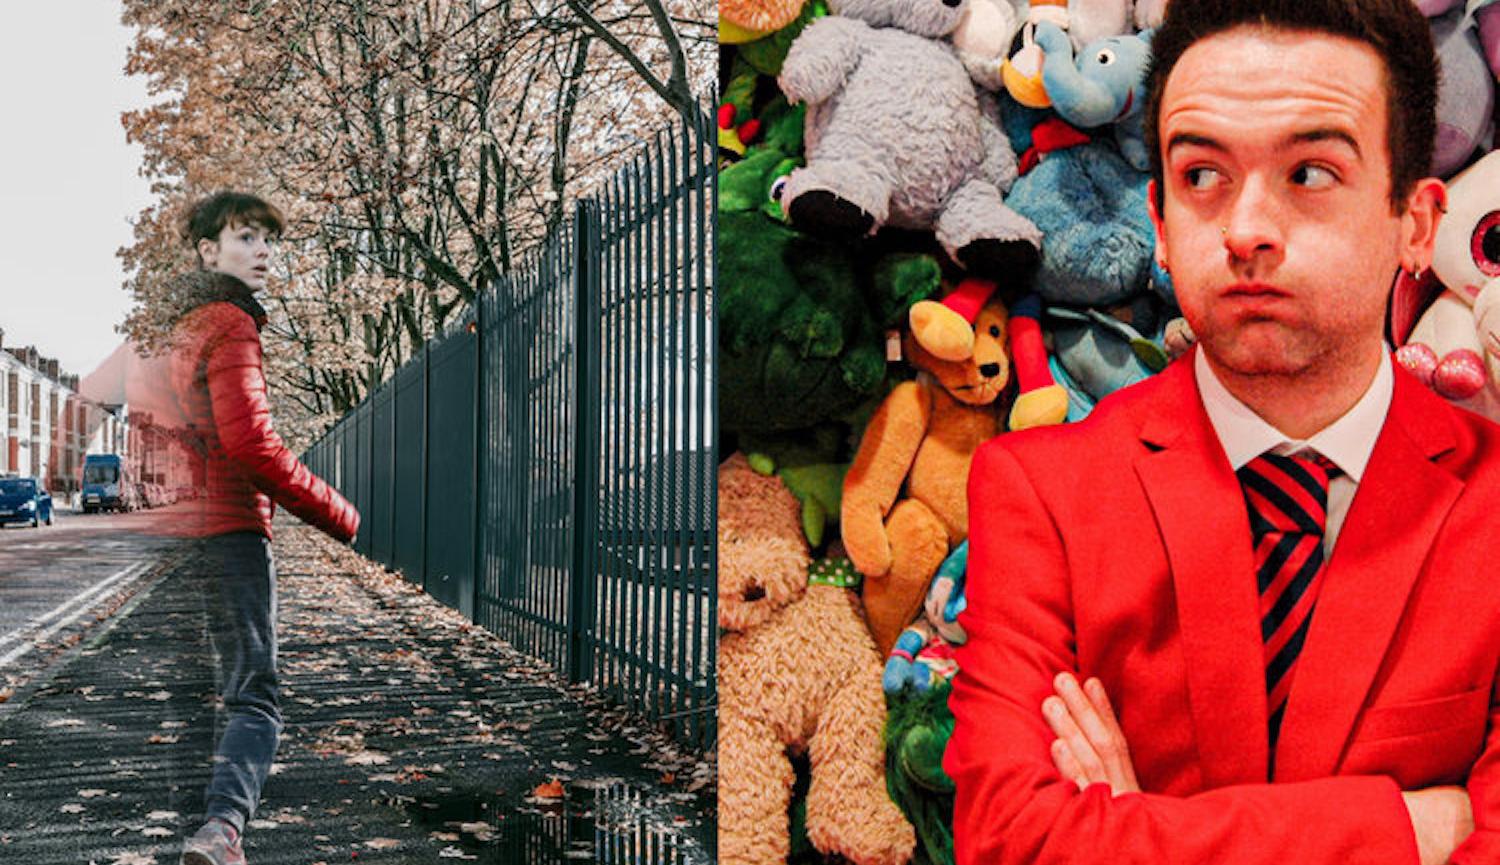 girl on street looking back in autumn + Redcoat in front of display of cuddly toys